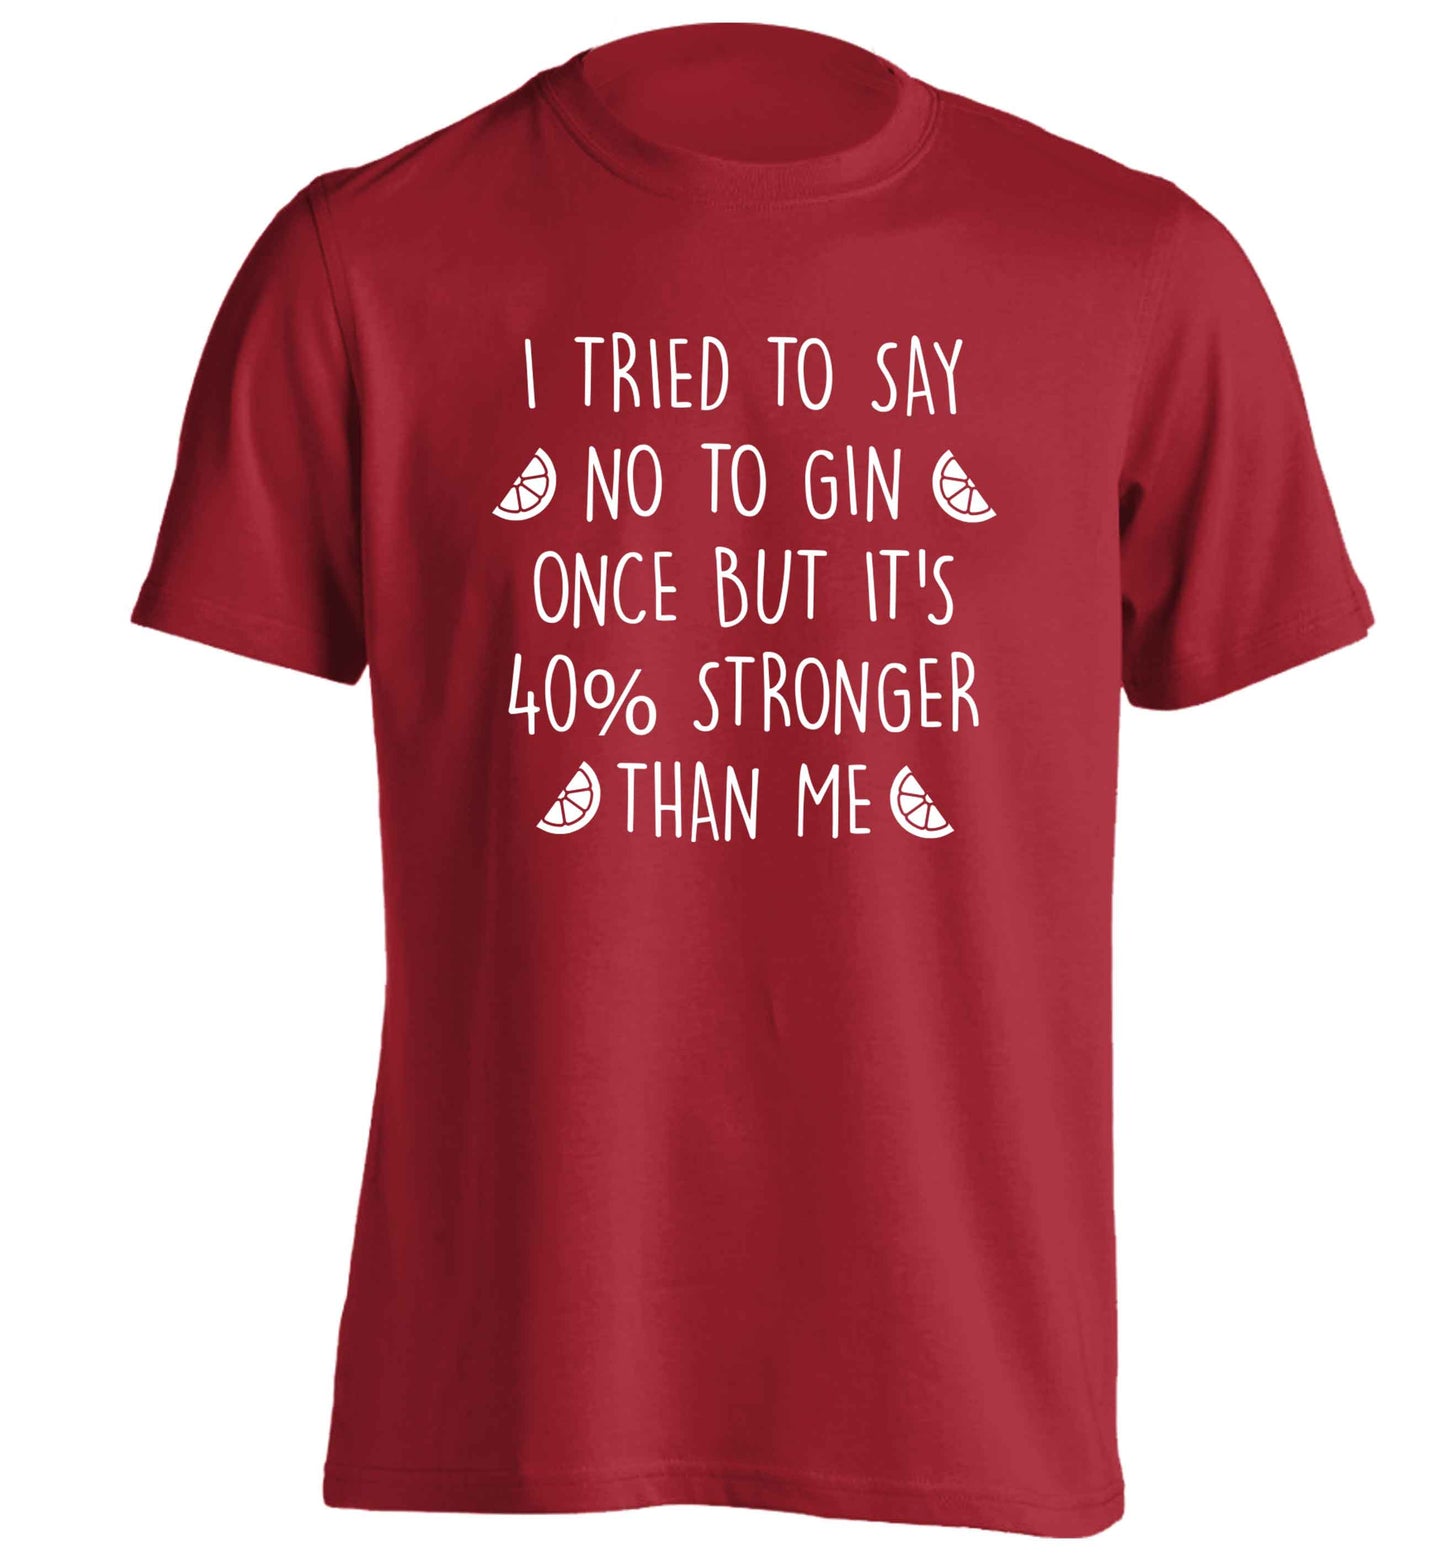 I tried to say no to gin once but it's 40% stronger than me adults unisex red Tshirt 2XL